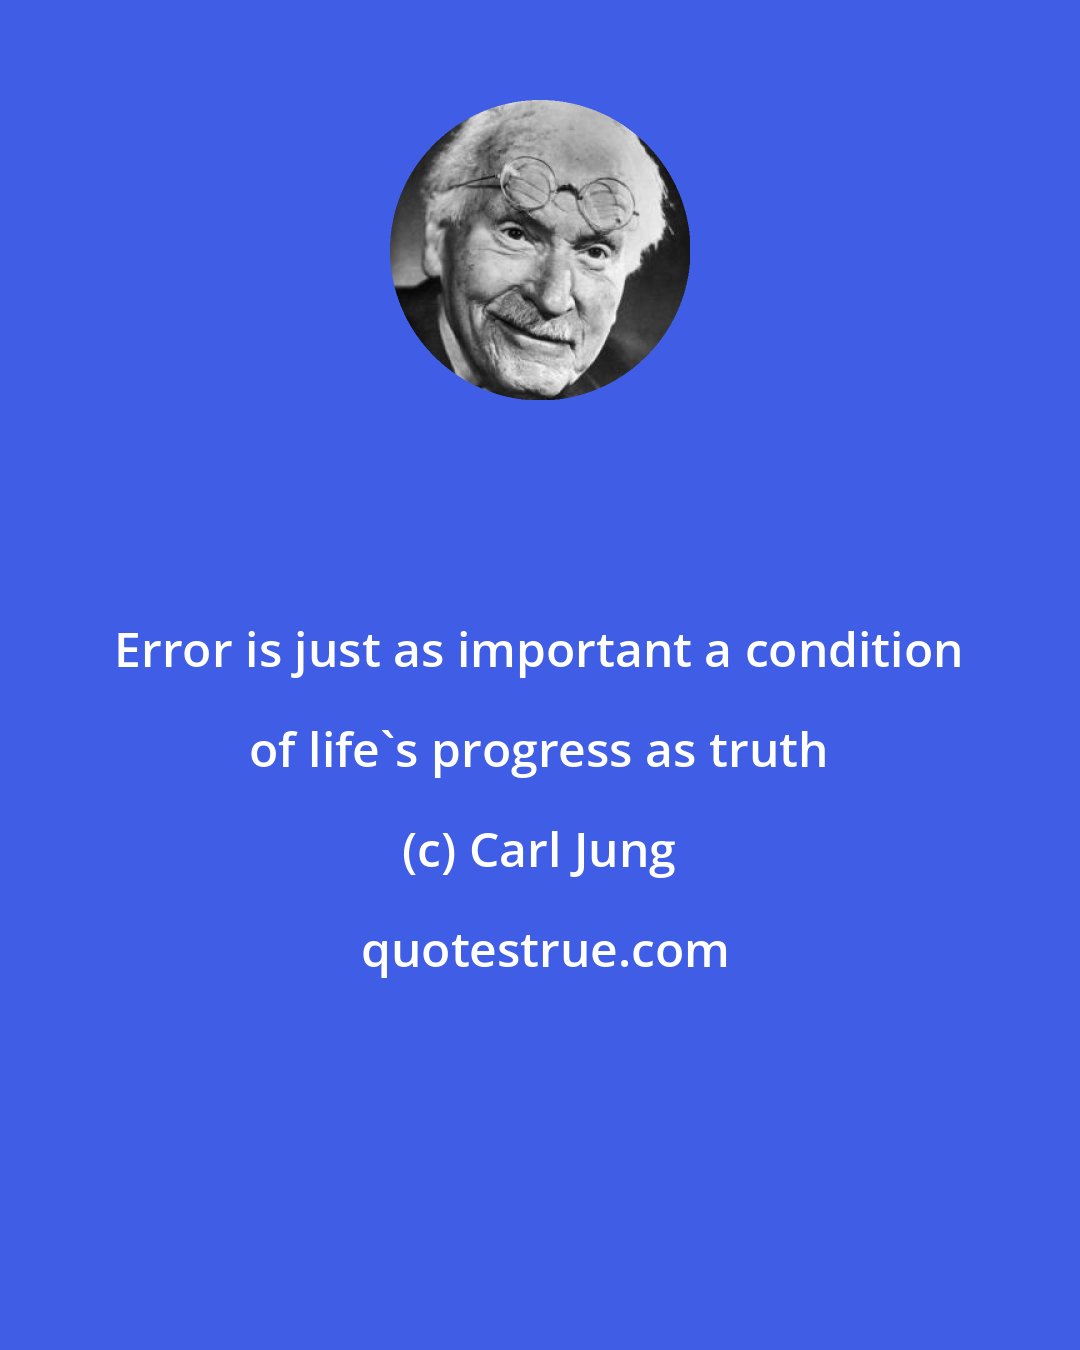 Carl Jung: Error is just as important a condition of life's progress as truth